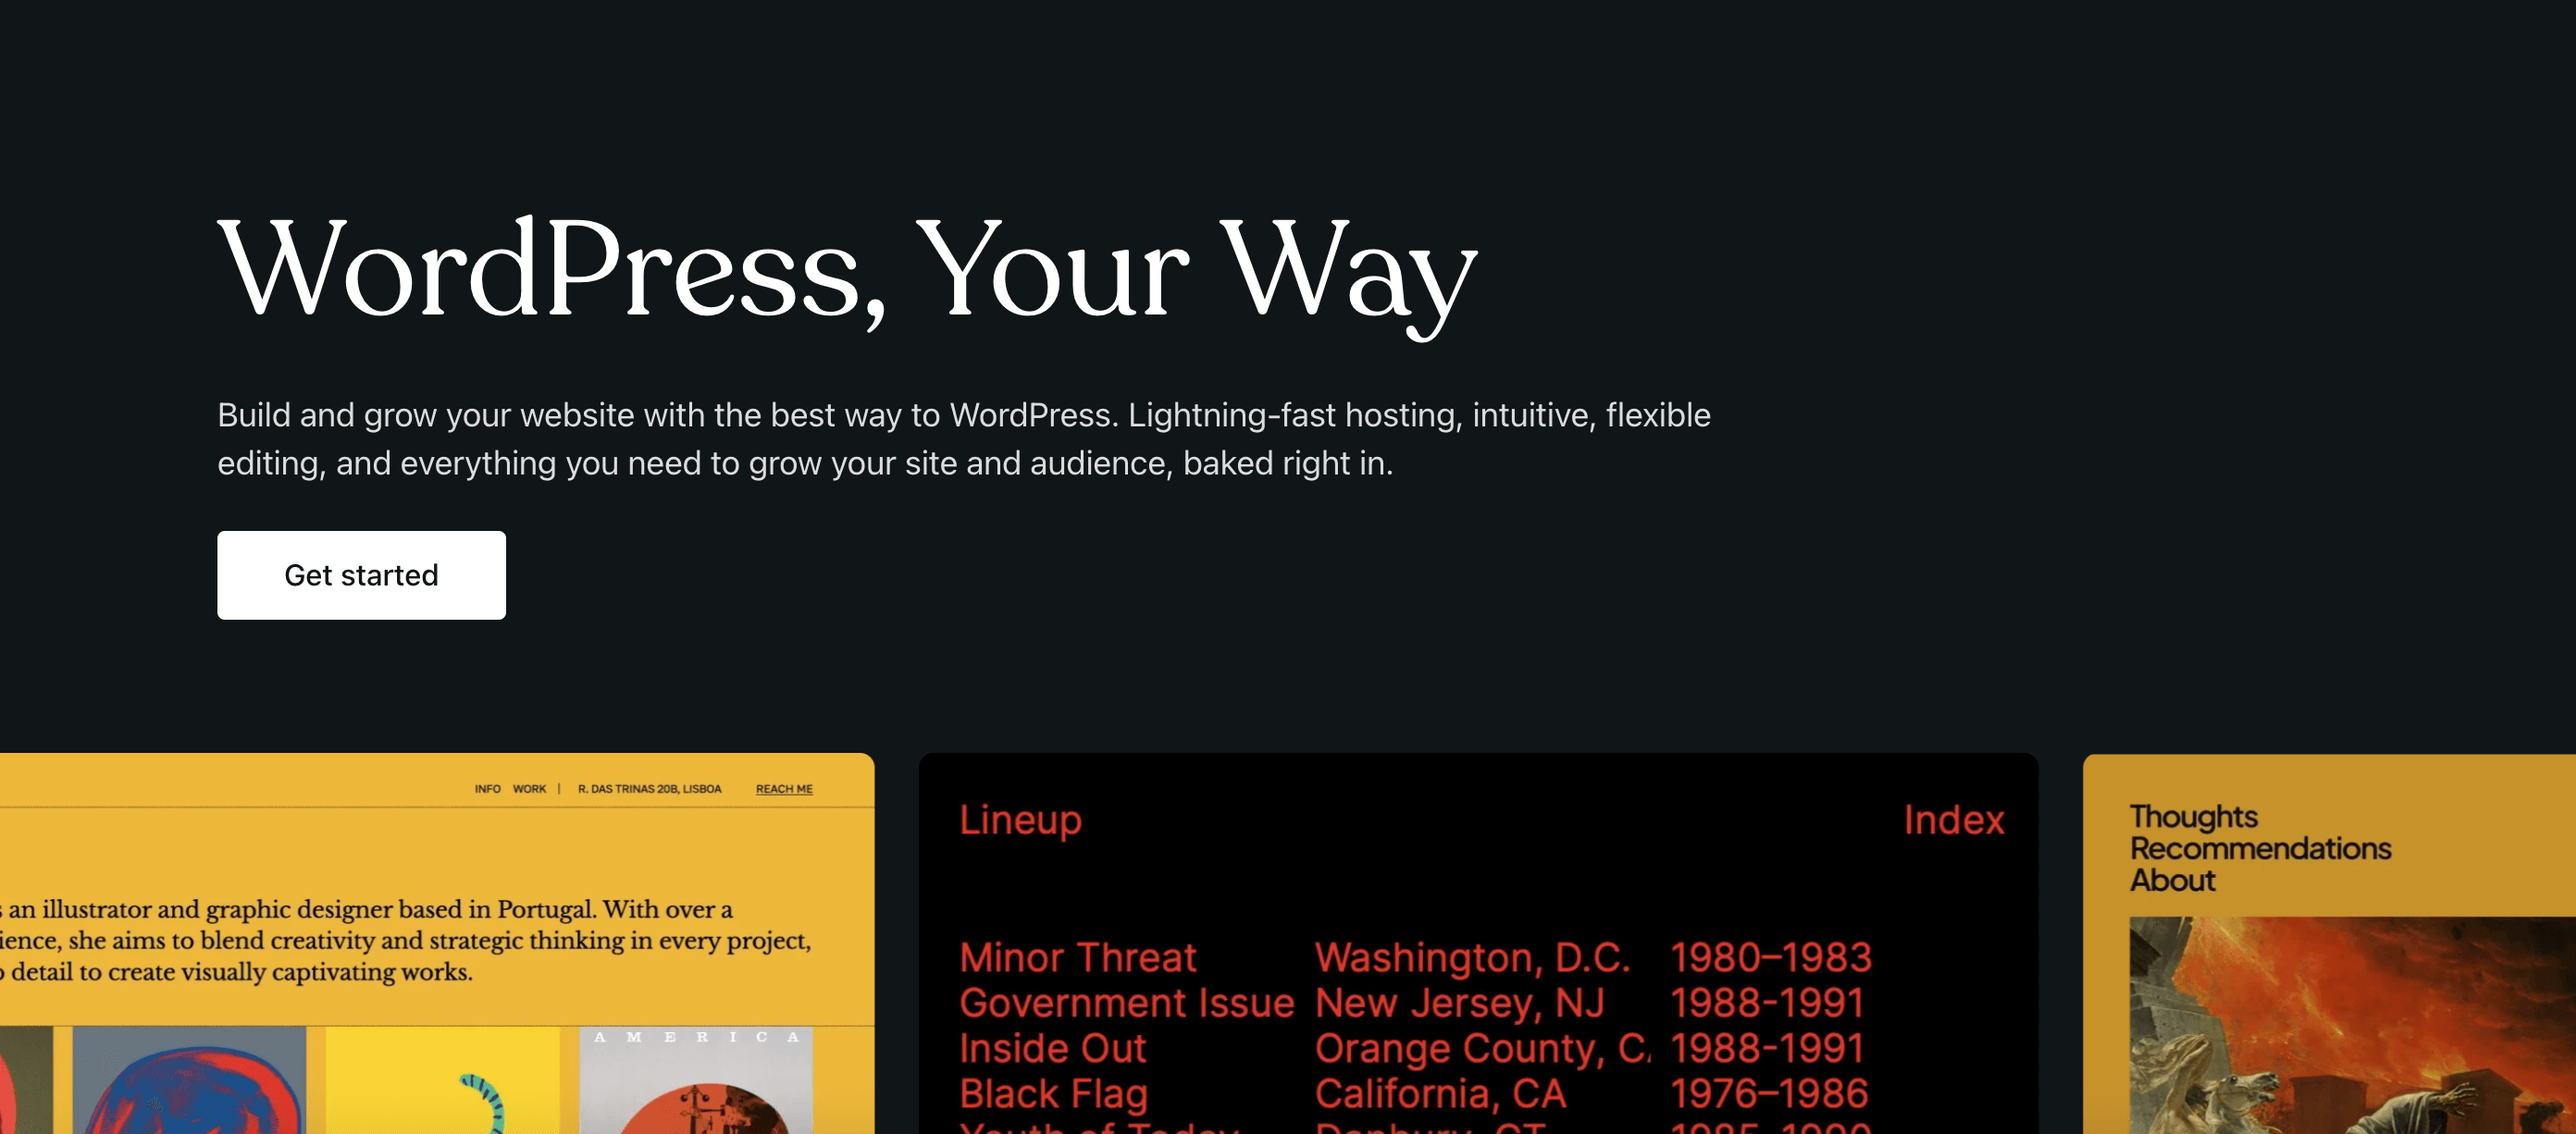 WordPress promotional page with the headline "WordPress, Your Way," highlighting features like fast hosting and flexible editing. A "Get started" button is prominent.